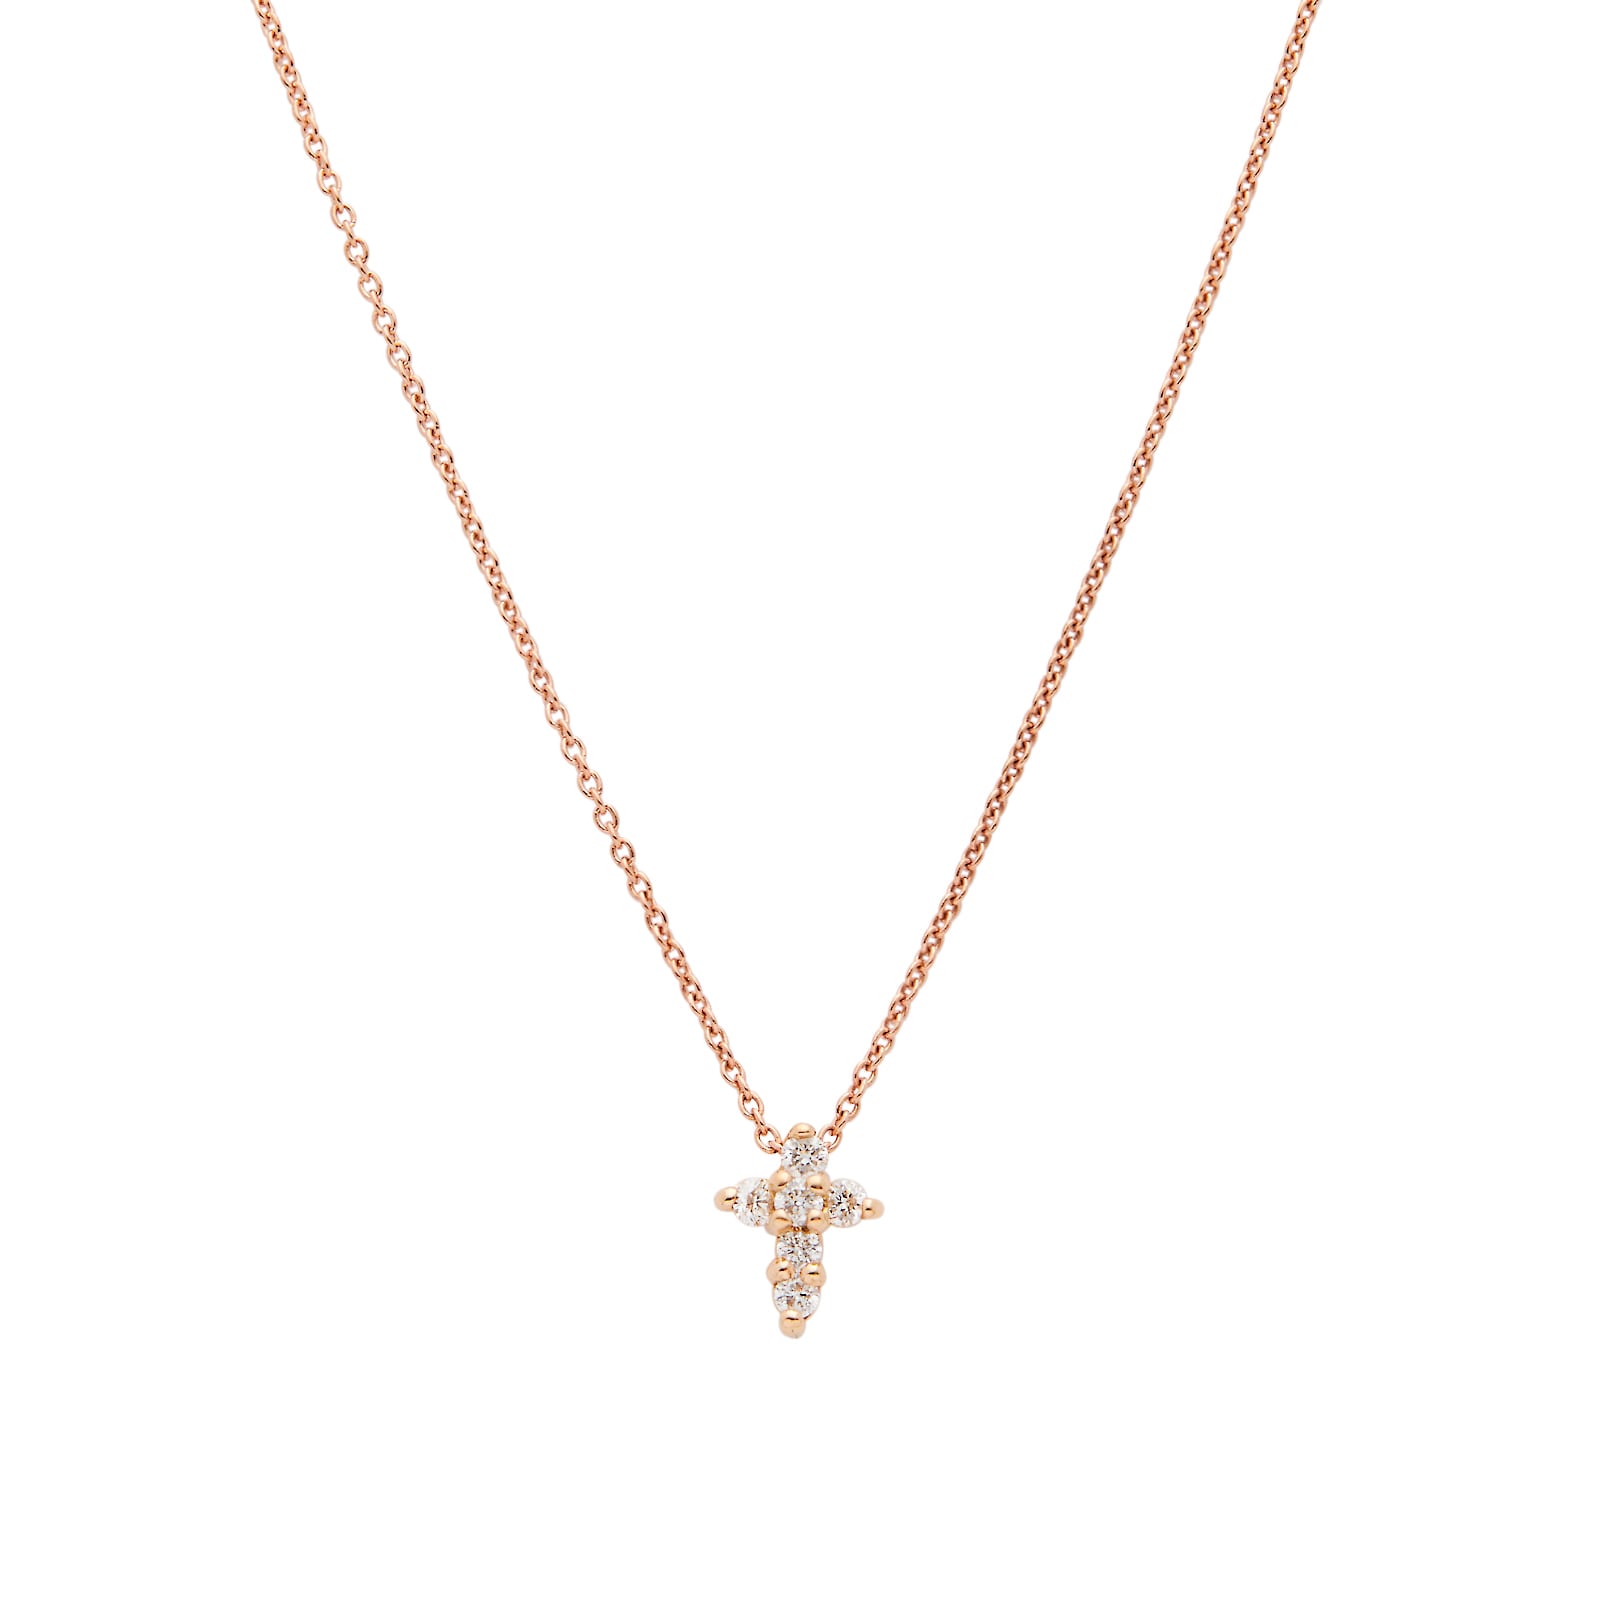 Integrated Diamond Cross Necklace, Yellow Gold by Roberto Coin at Neiman  Marcus. | Diamond cross necklaces, Dainty diamond necklace, Cross necklace